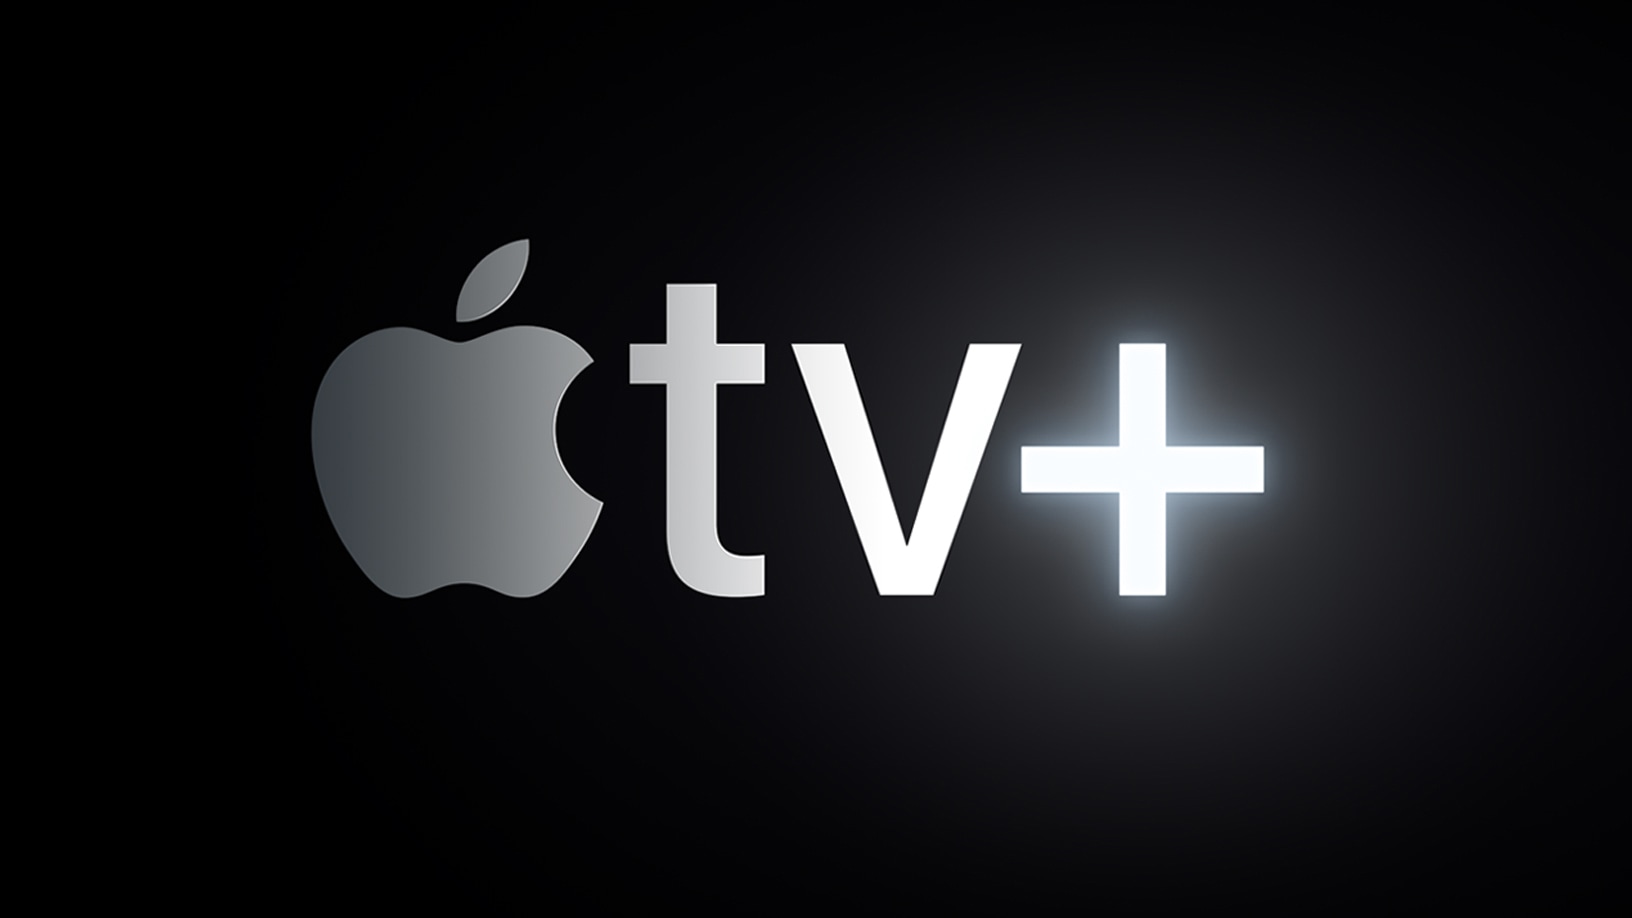 Apple TV + will also be released on Samsung Smart TVs